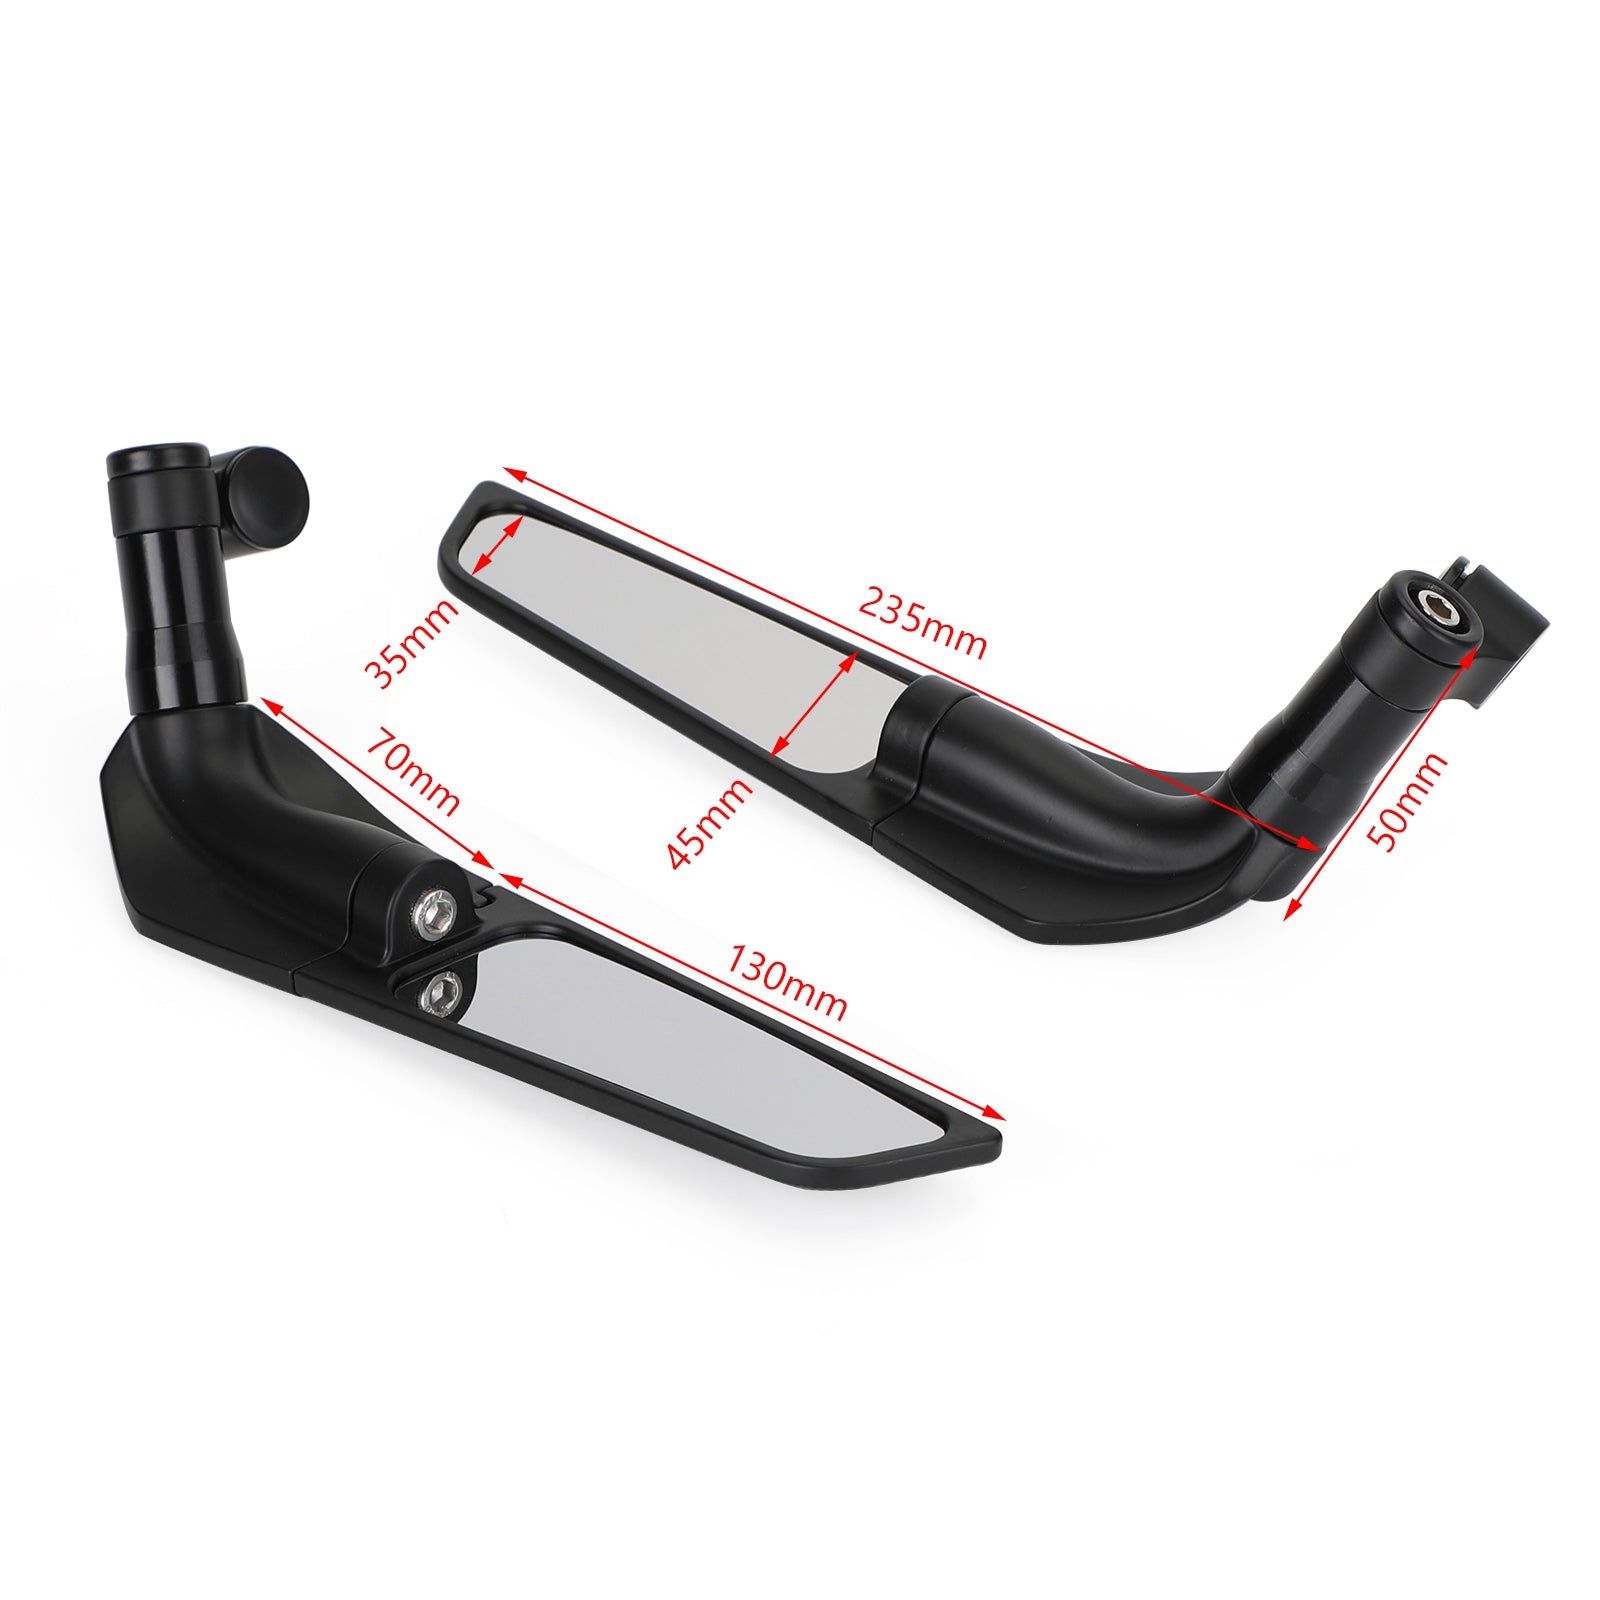 Wing Fin Spoiler Side Rearview Mirrors For Yamaha XT660 R/X Tenere 660 700 1200 Generic